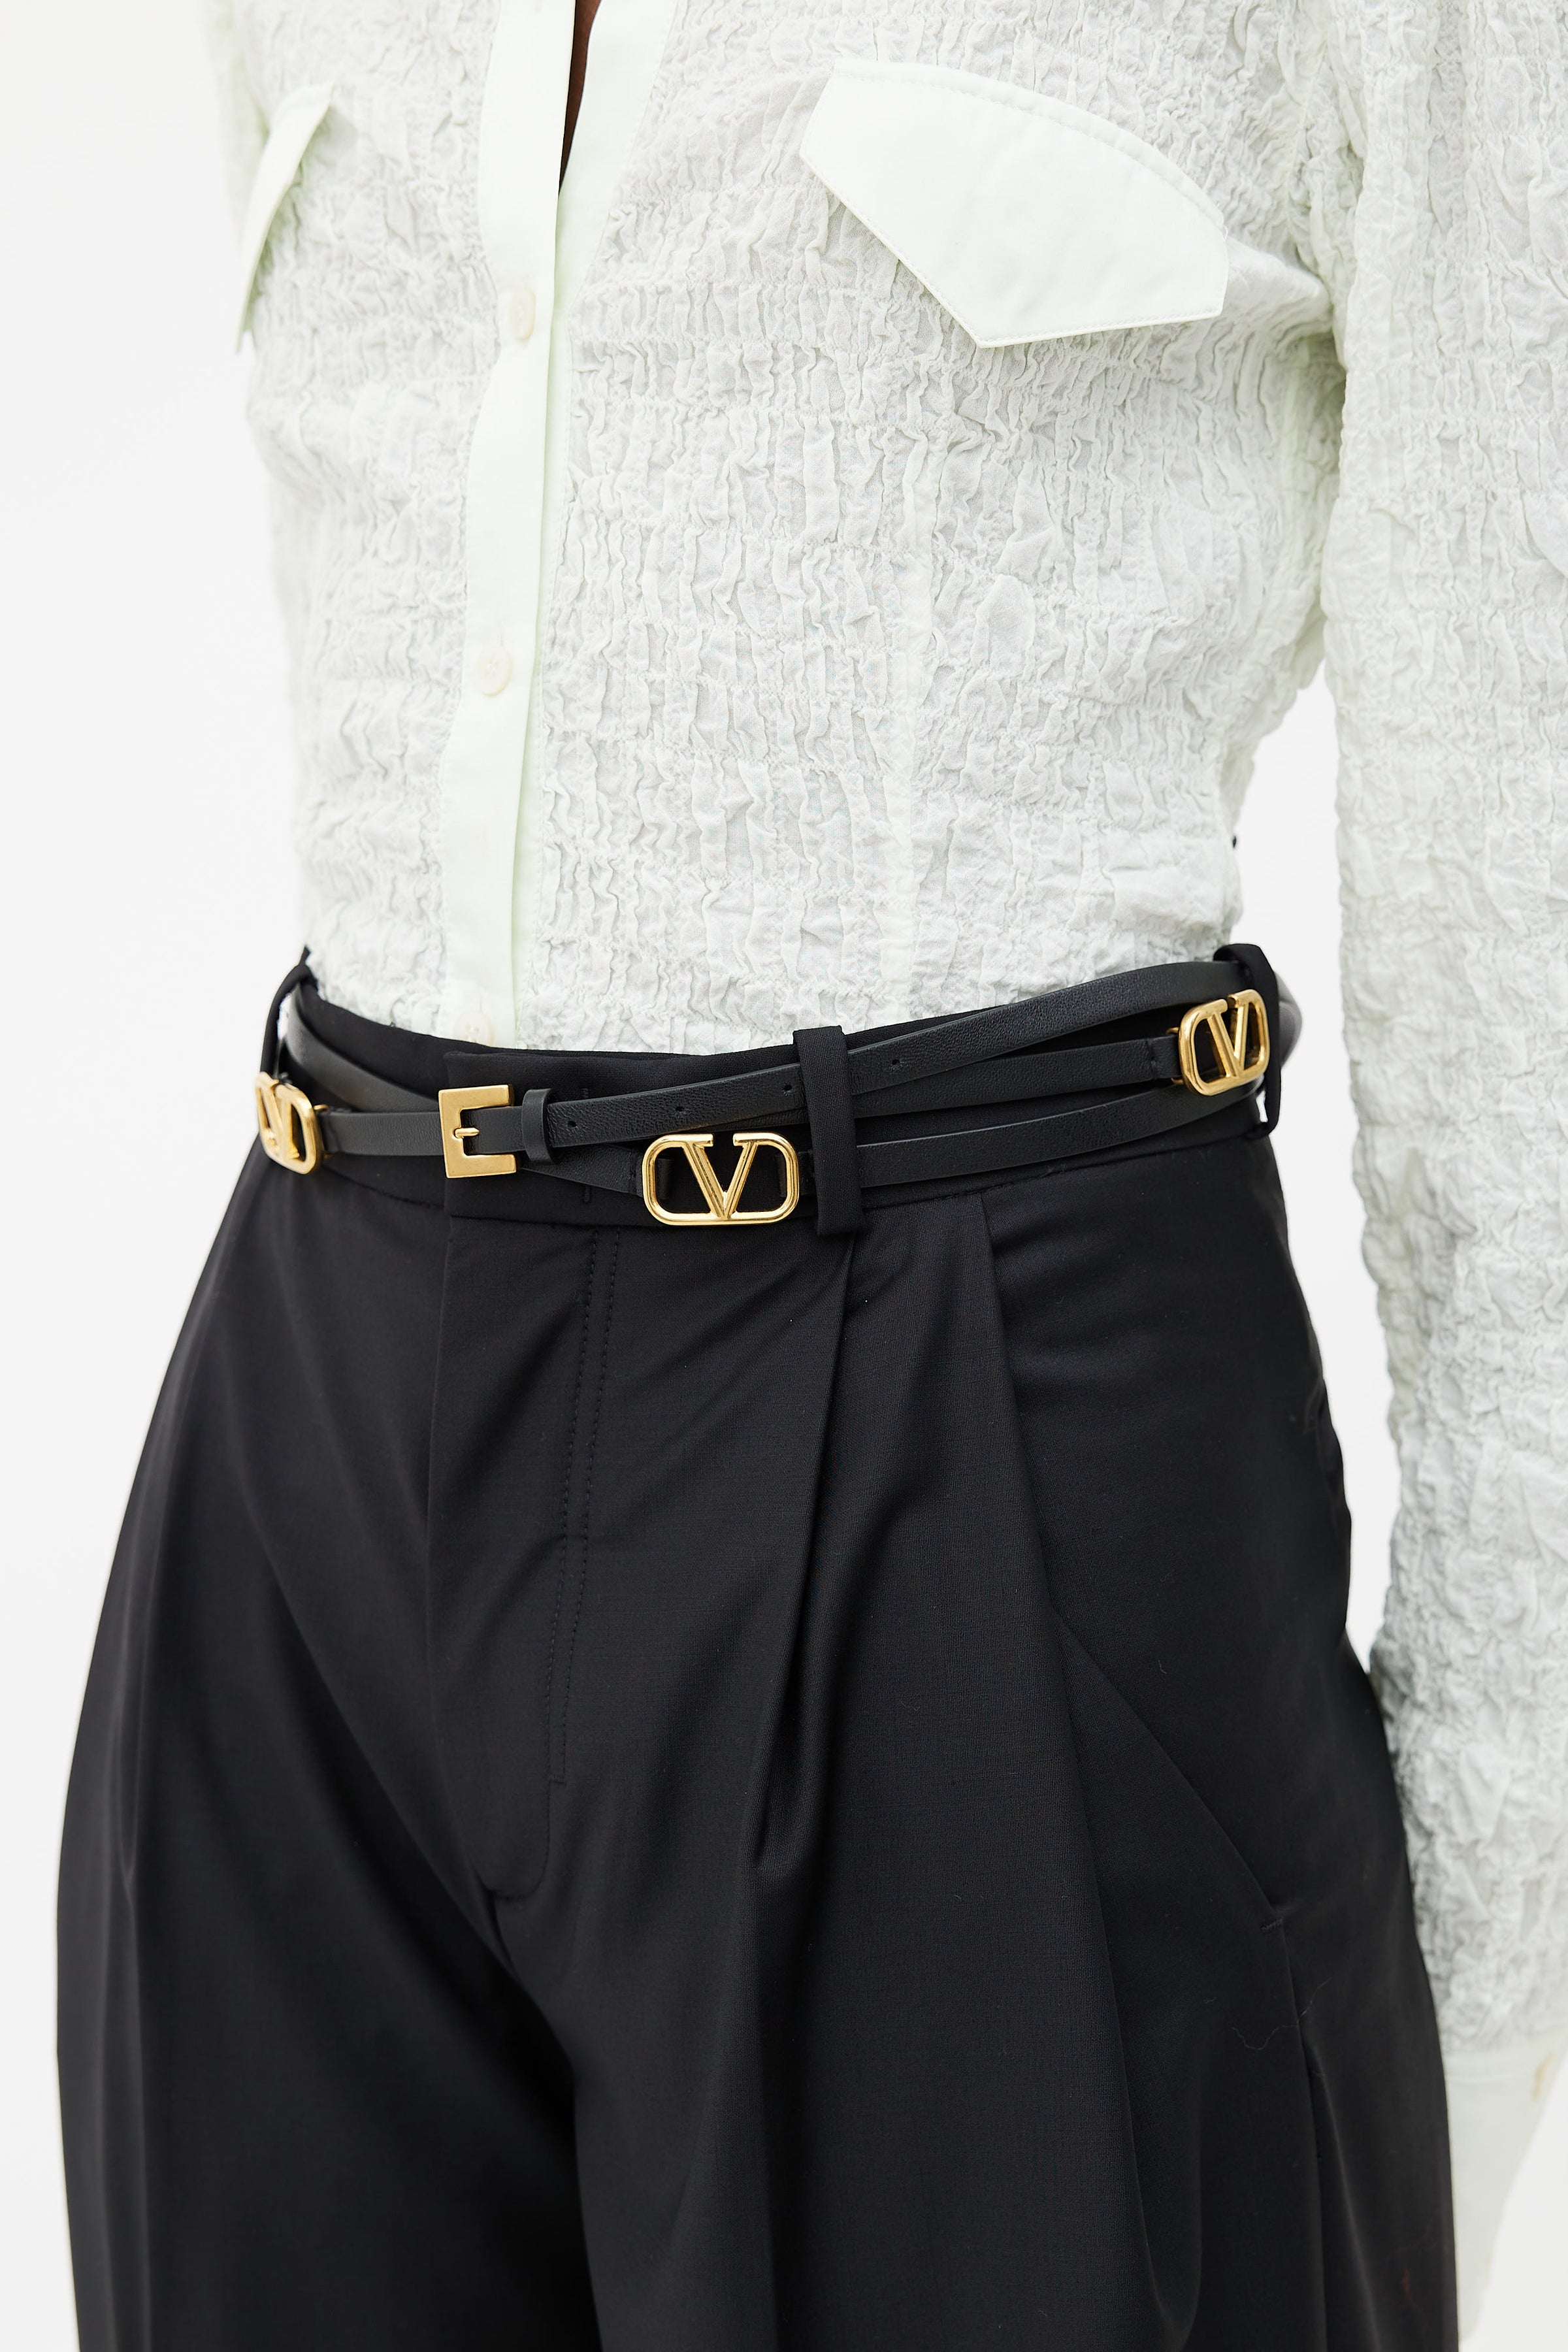 valentino belt outfit